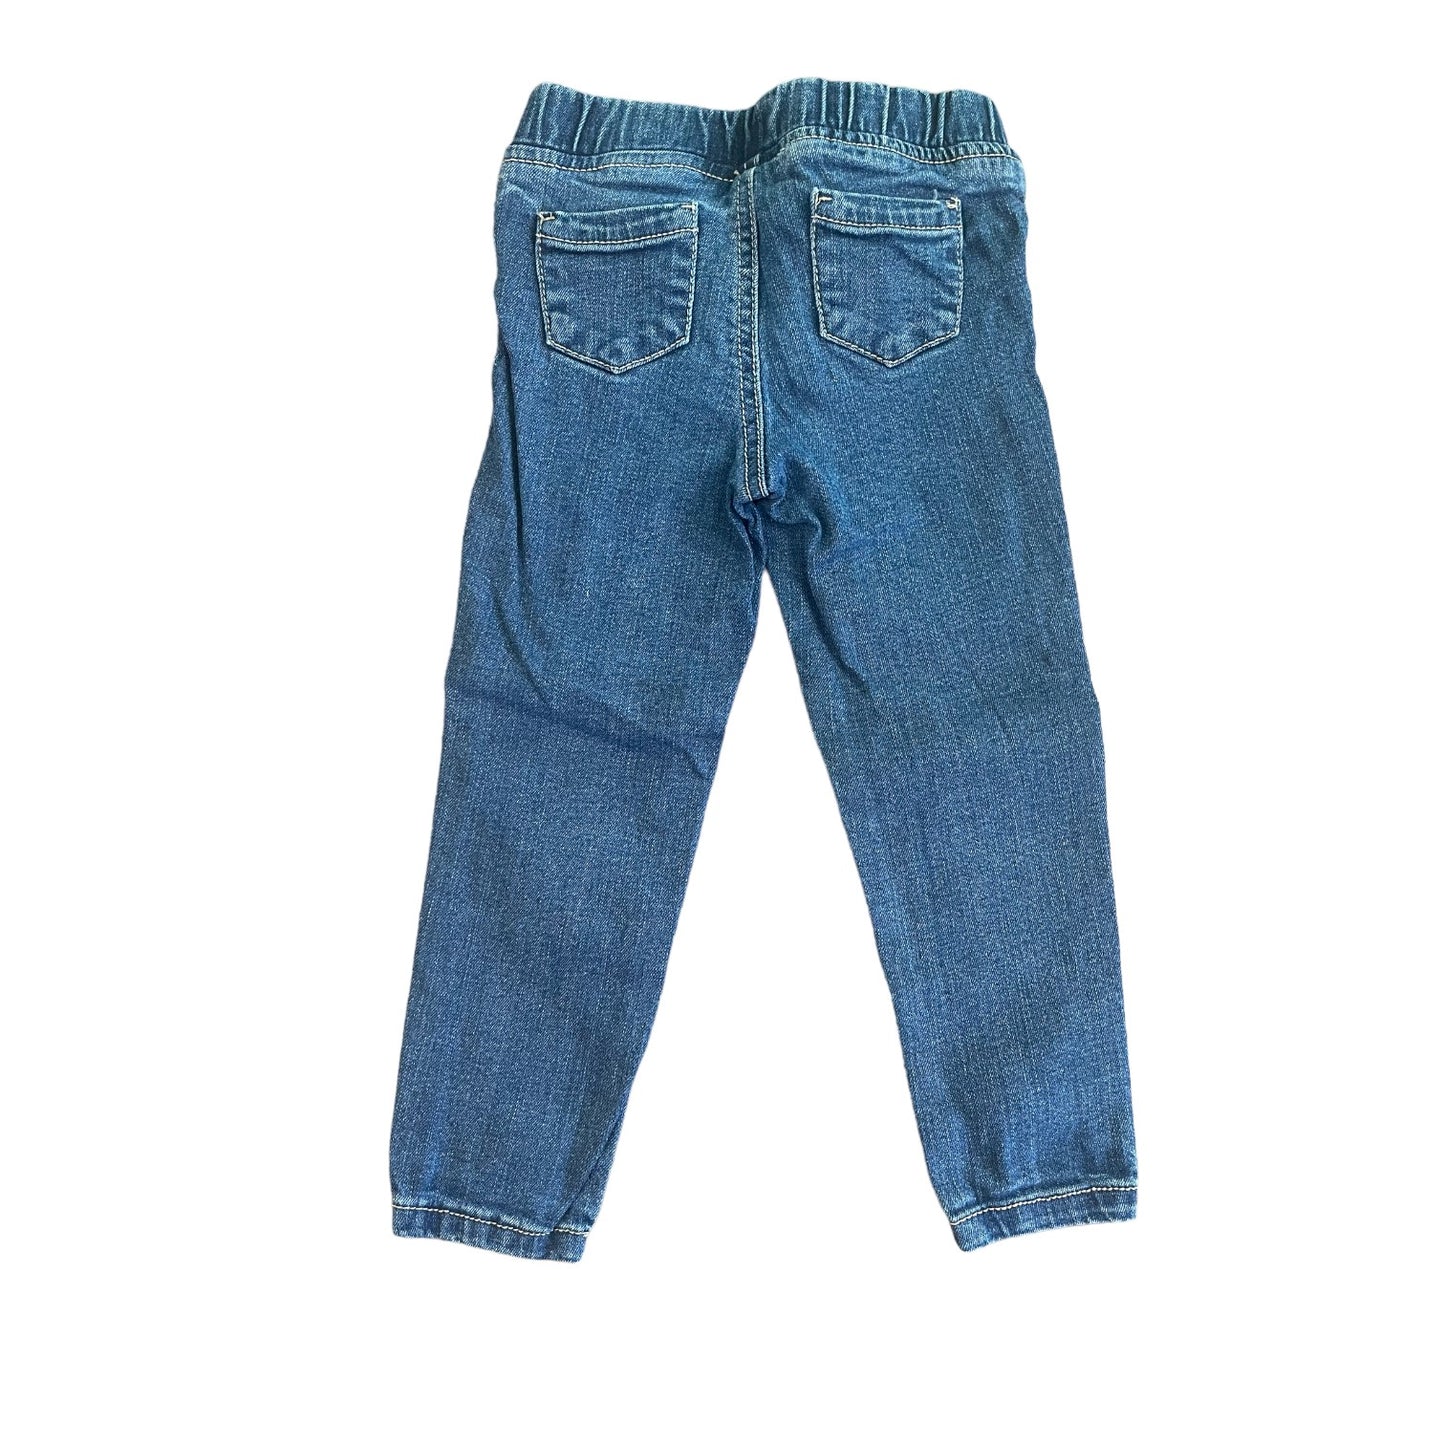 Carter's Toddler Girls Jeans Size 3T